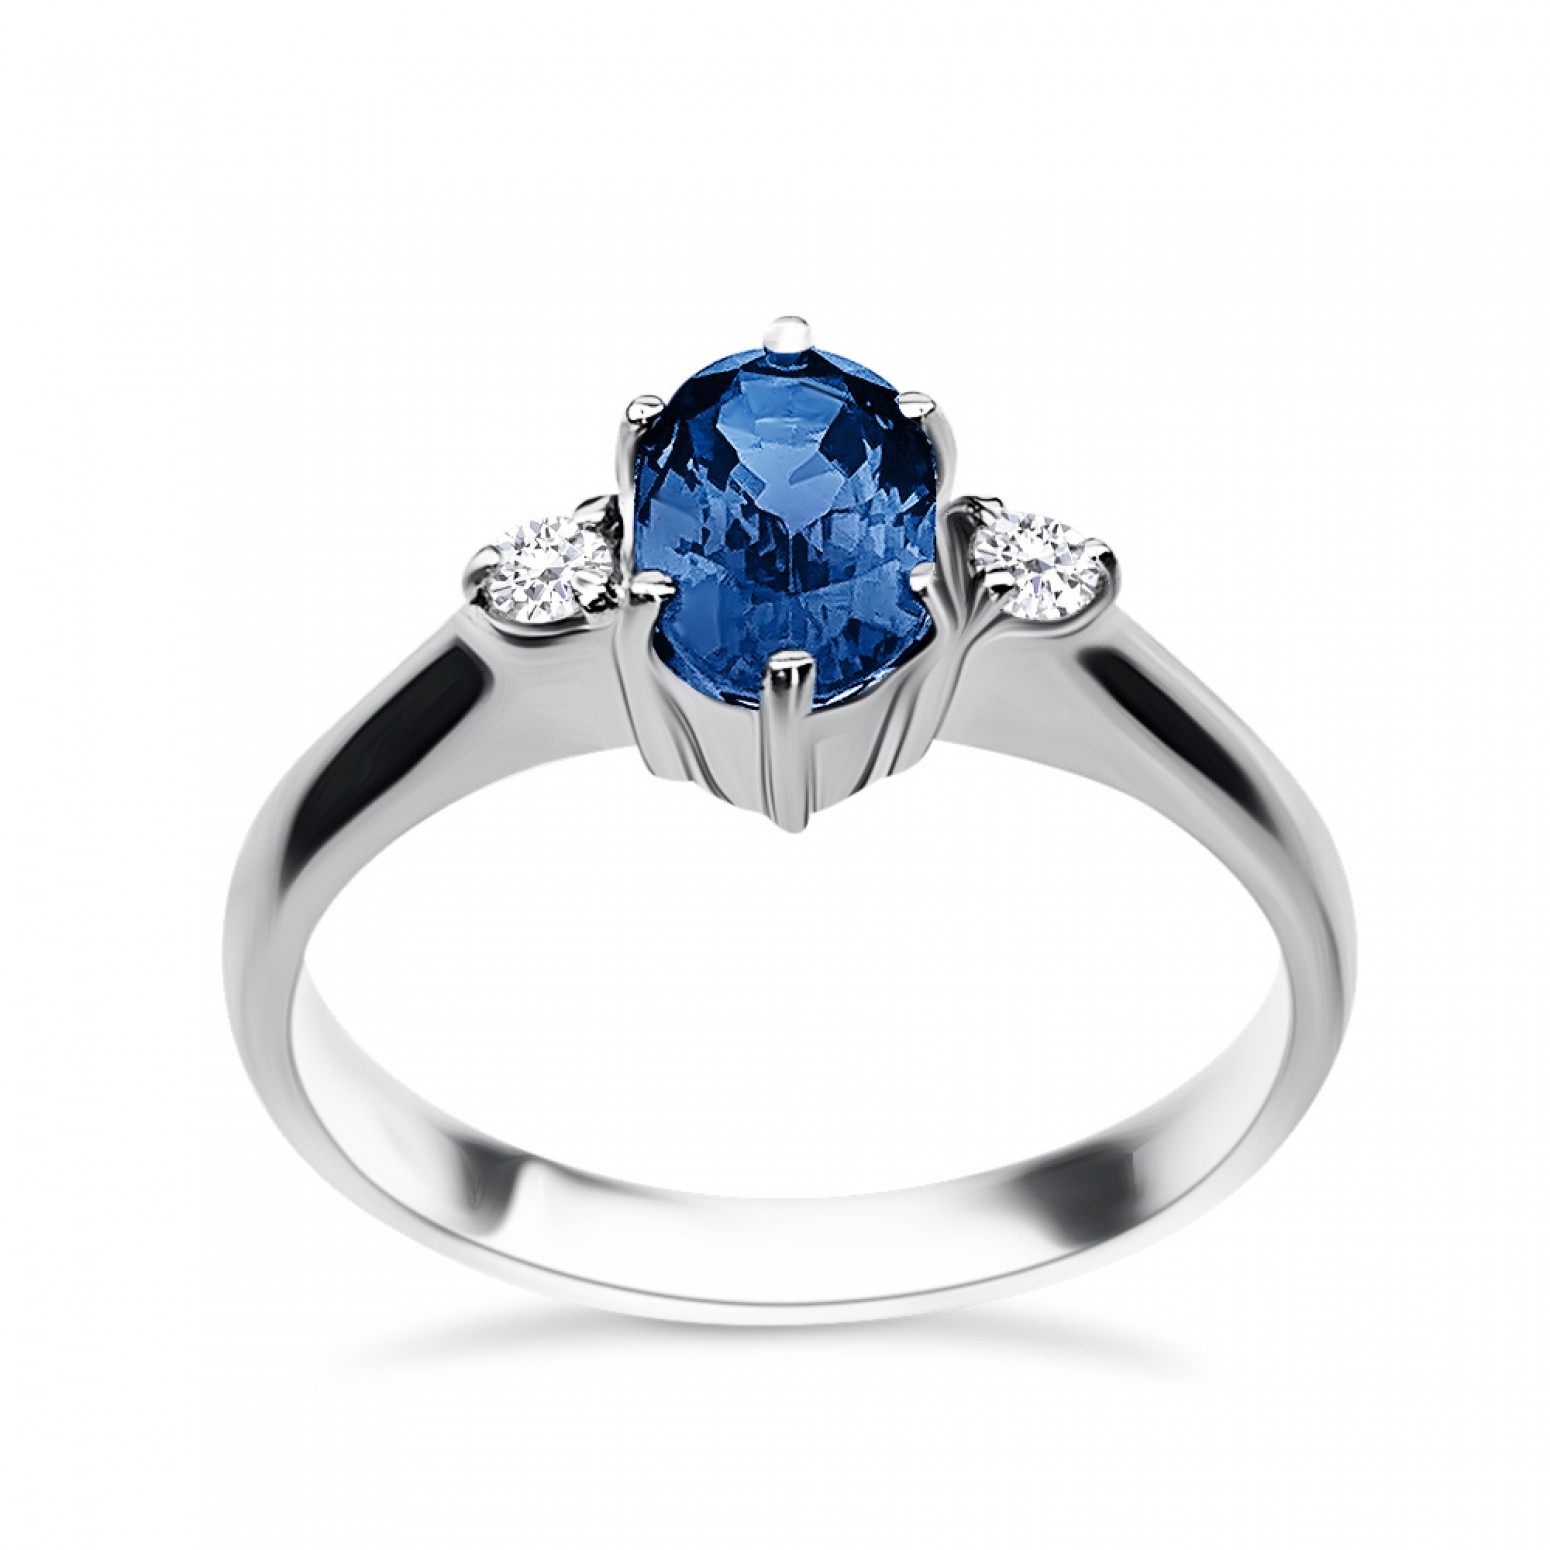 Solitaire ring 18K white gold with sapphire 1.10ct and diamonds , VS1, F da2936 ENGAGEMENT RINGS Κοσμηματα - chrilia.gr